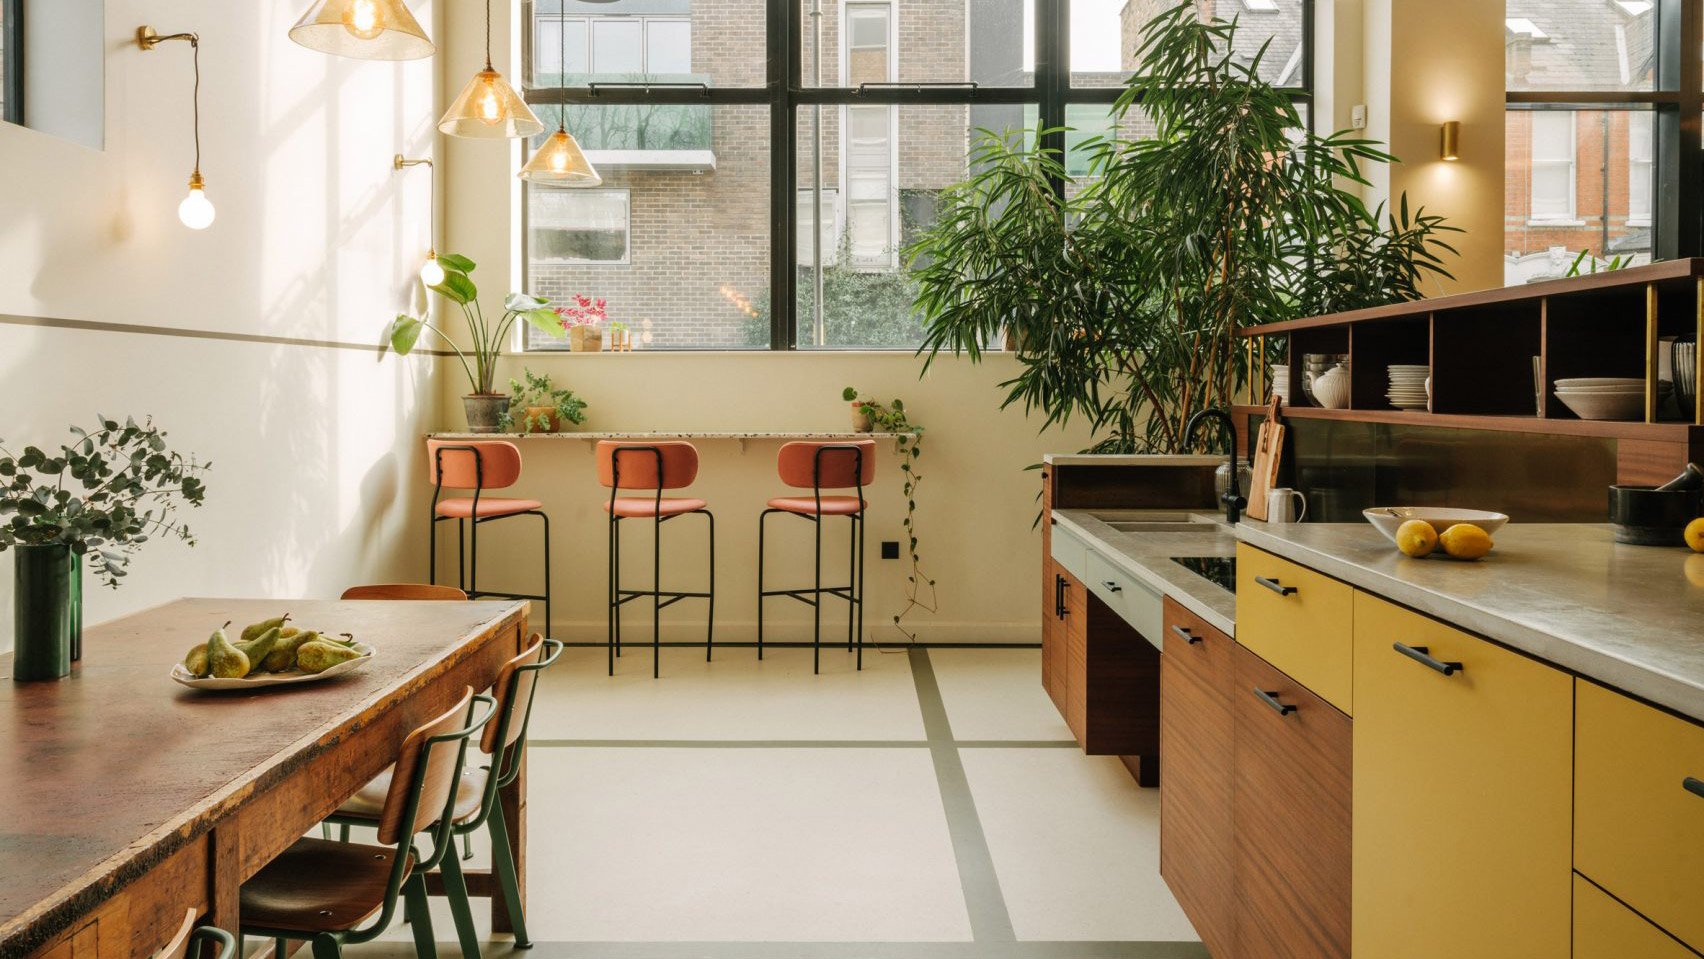 The Mint List fits out London office with mid-century-style movable furniture